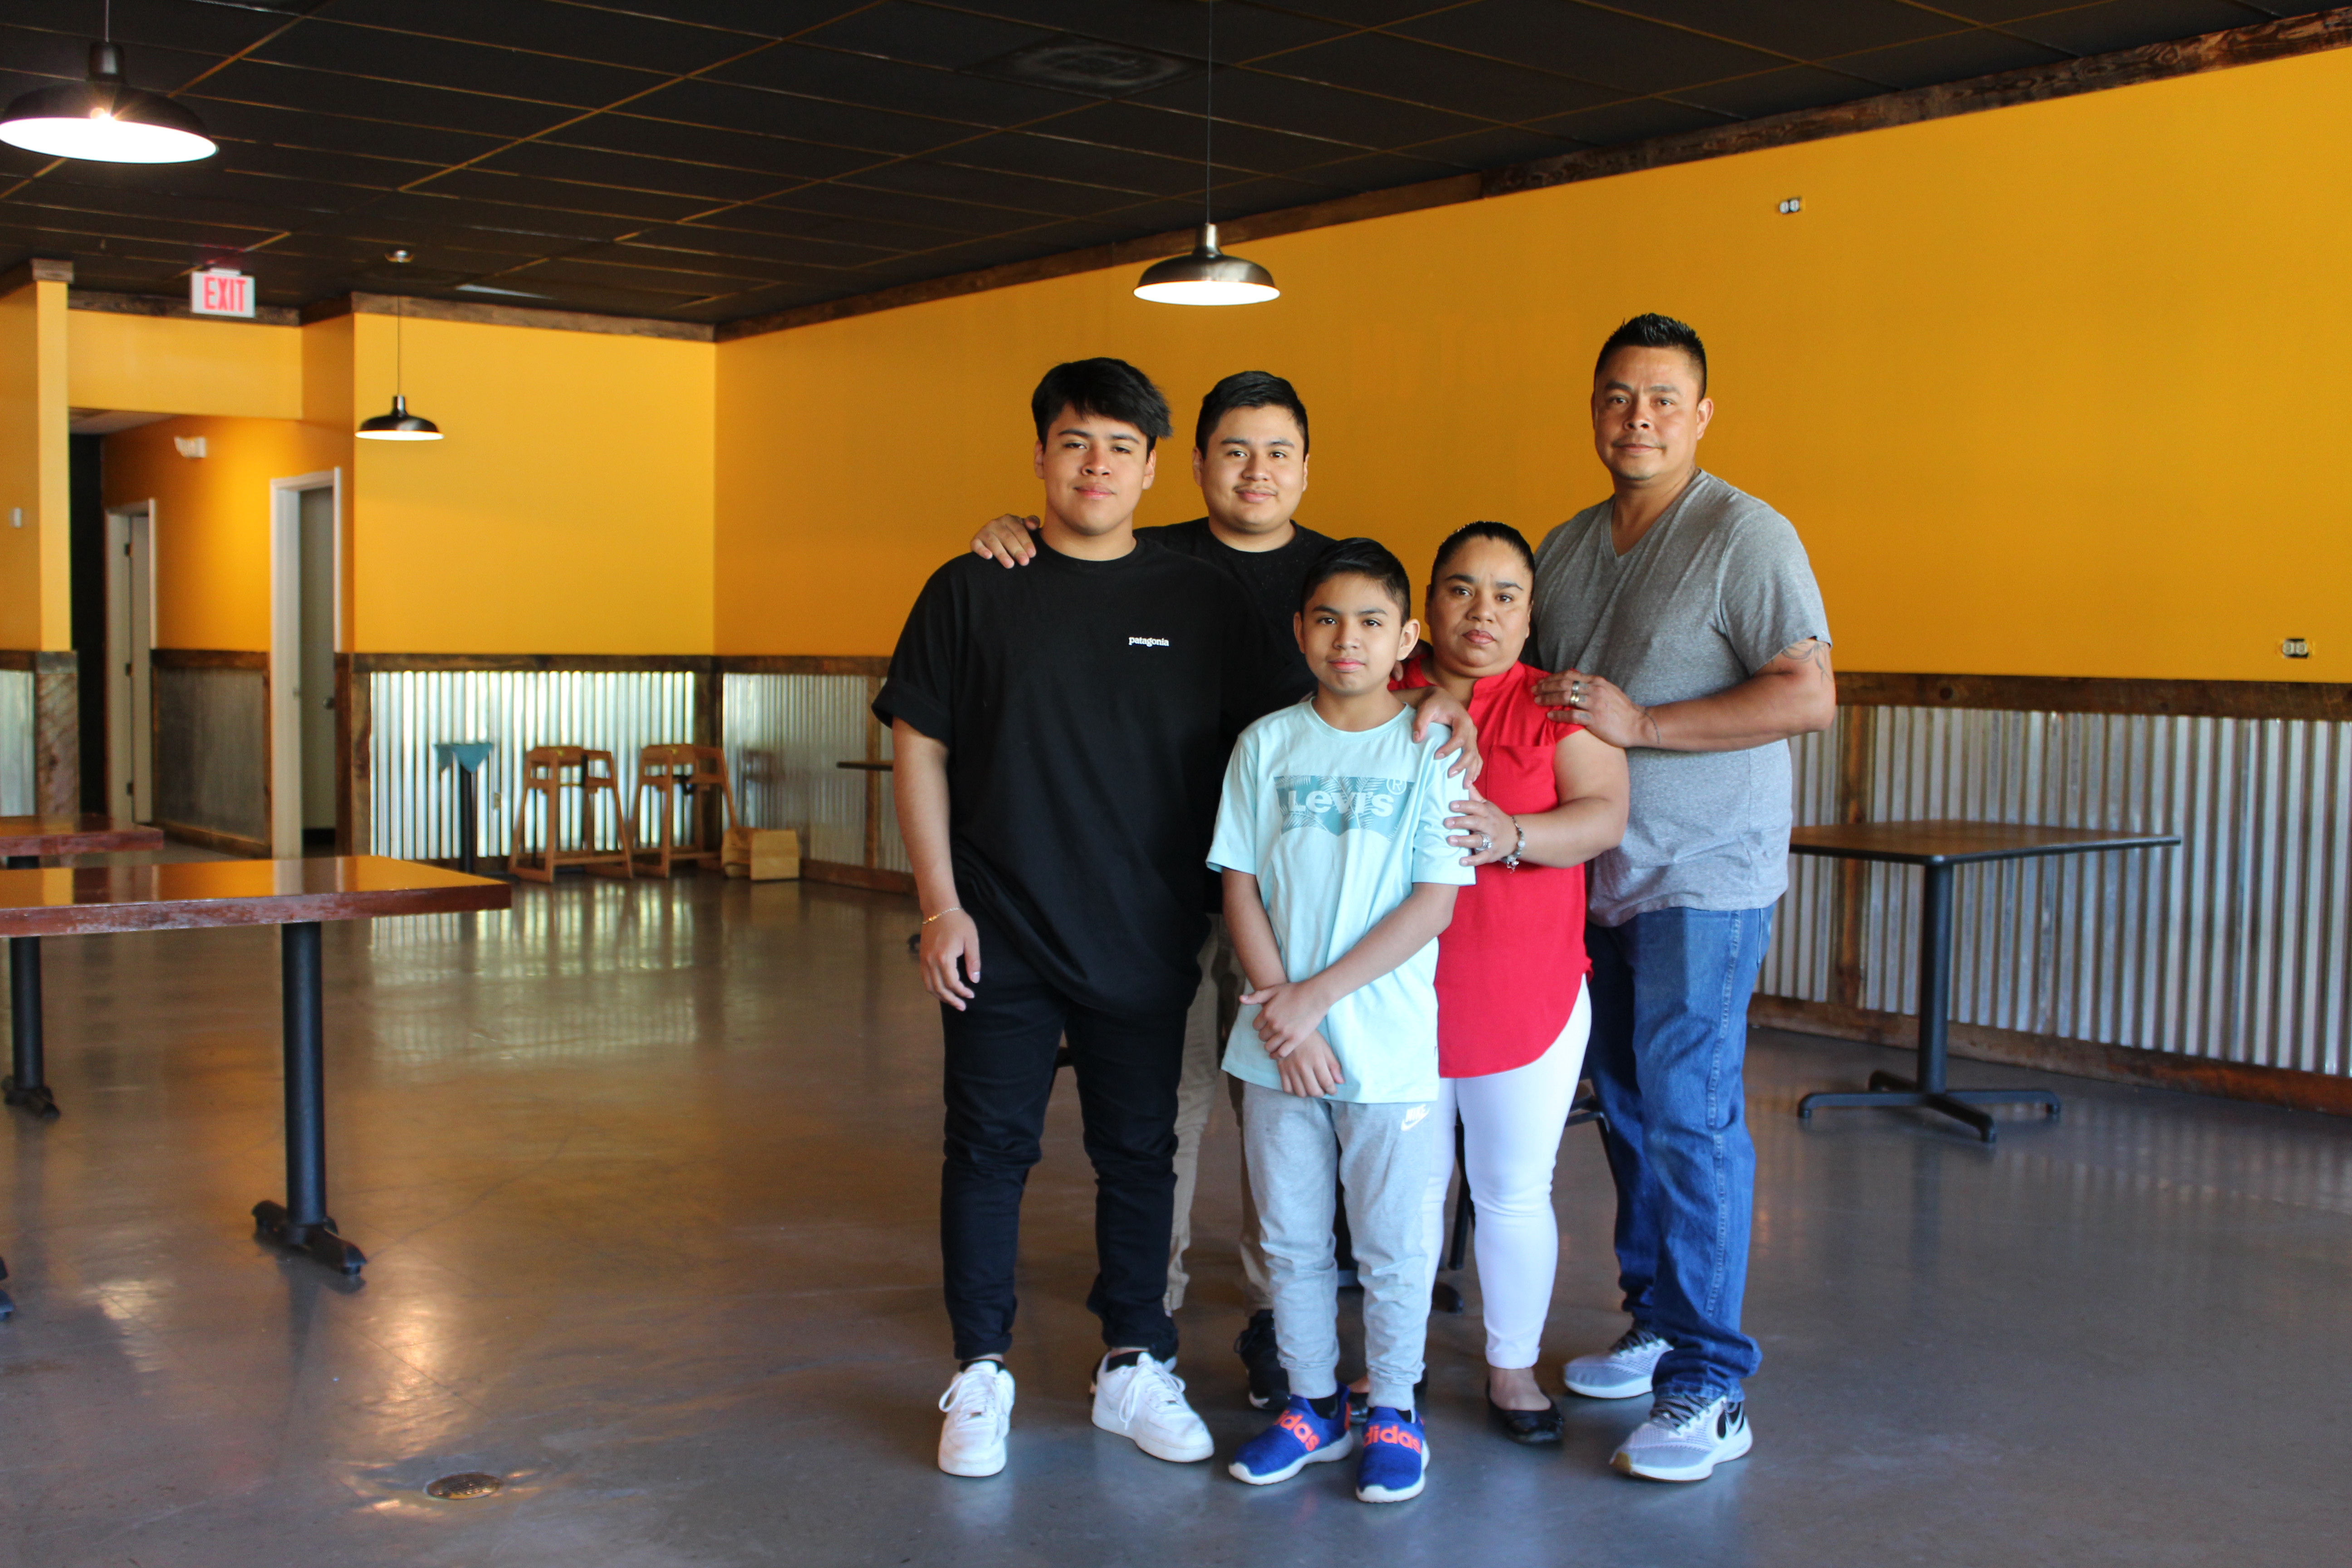 Claudia Pile and her three sons, left to right, Johnny, James and Joshua Pile, and husband Victor Hernandez in their new  restaurant space in the Spruce Pine Commons  Shopping Center. They hope to open the new location in two weeks. Photo by Juliana Walker/MNJ.